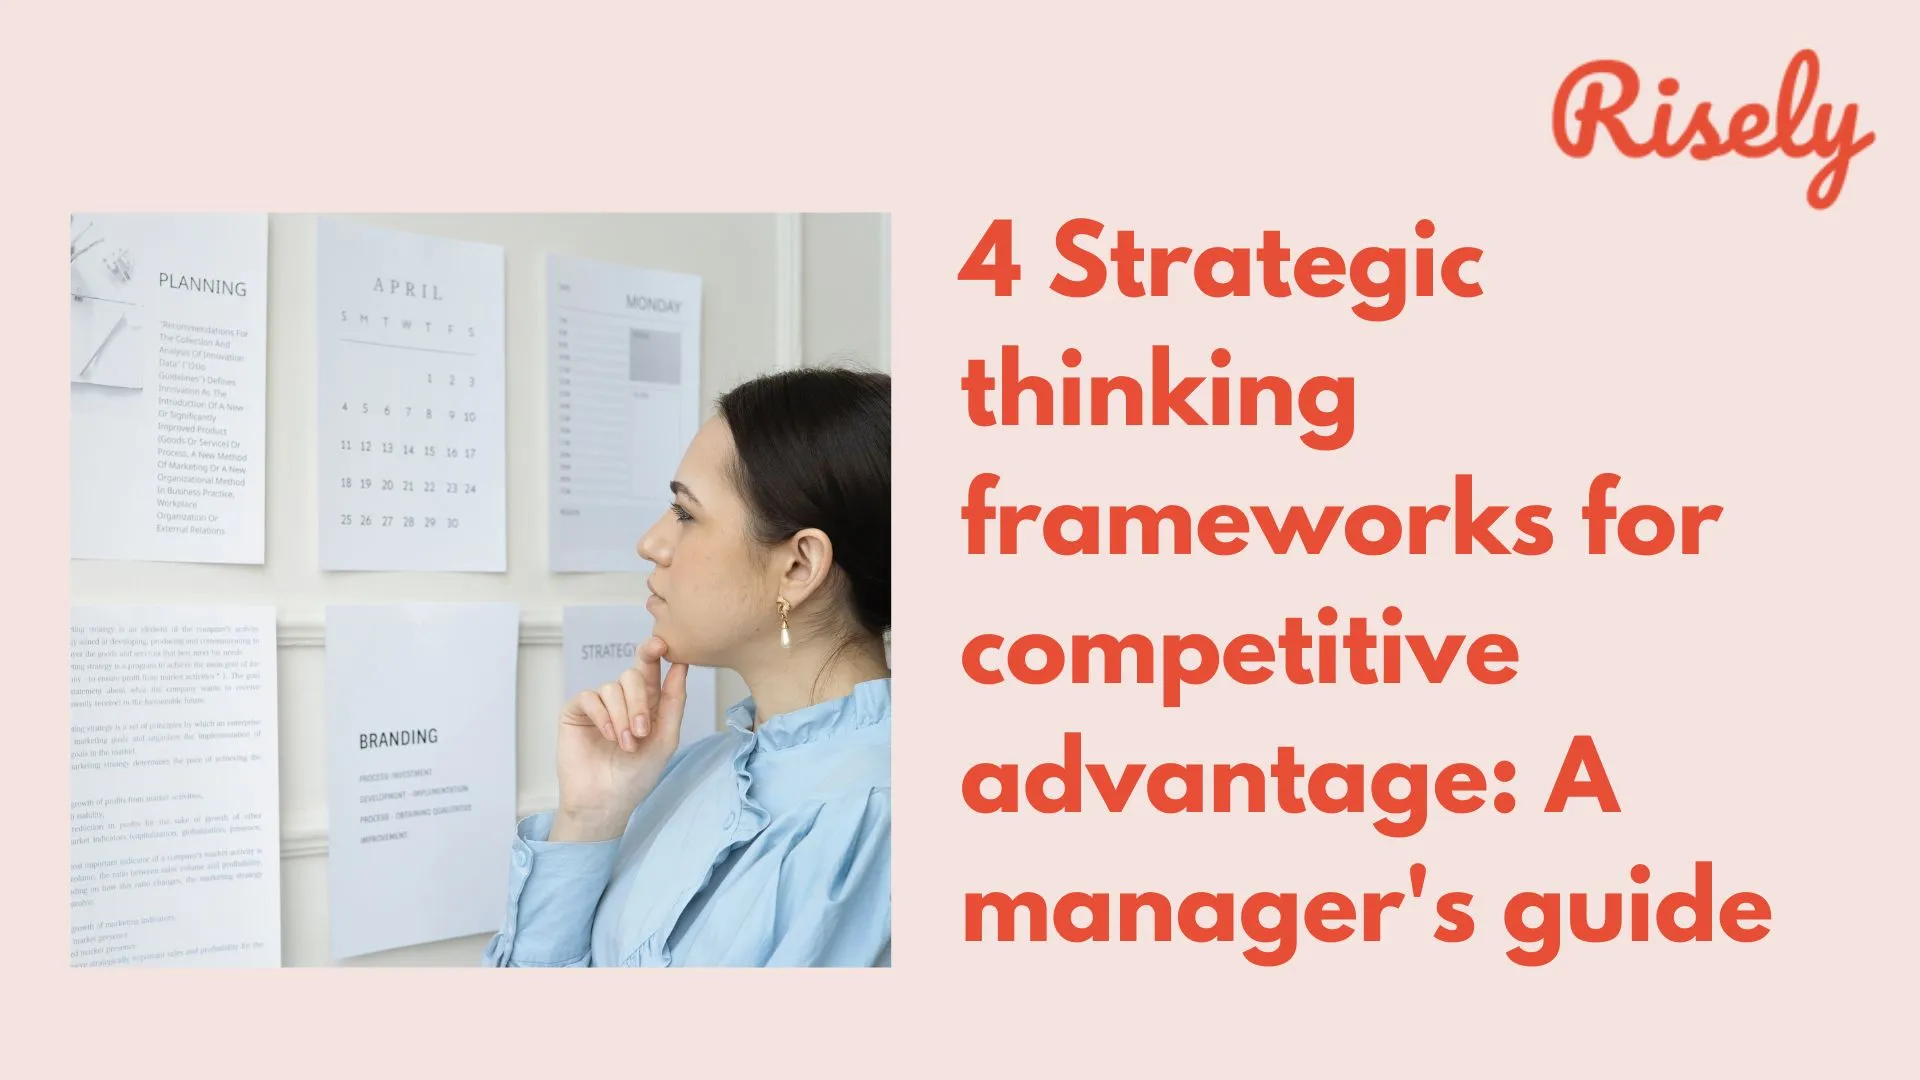 4 Strategic thinking frameworks for competitive advantage: A manager’s guide